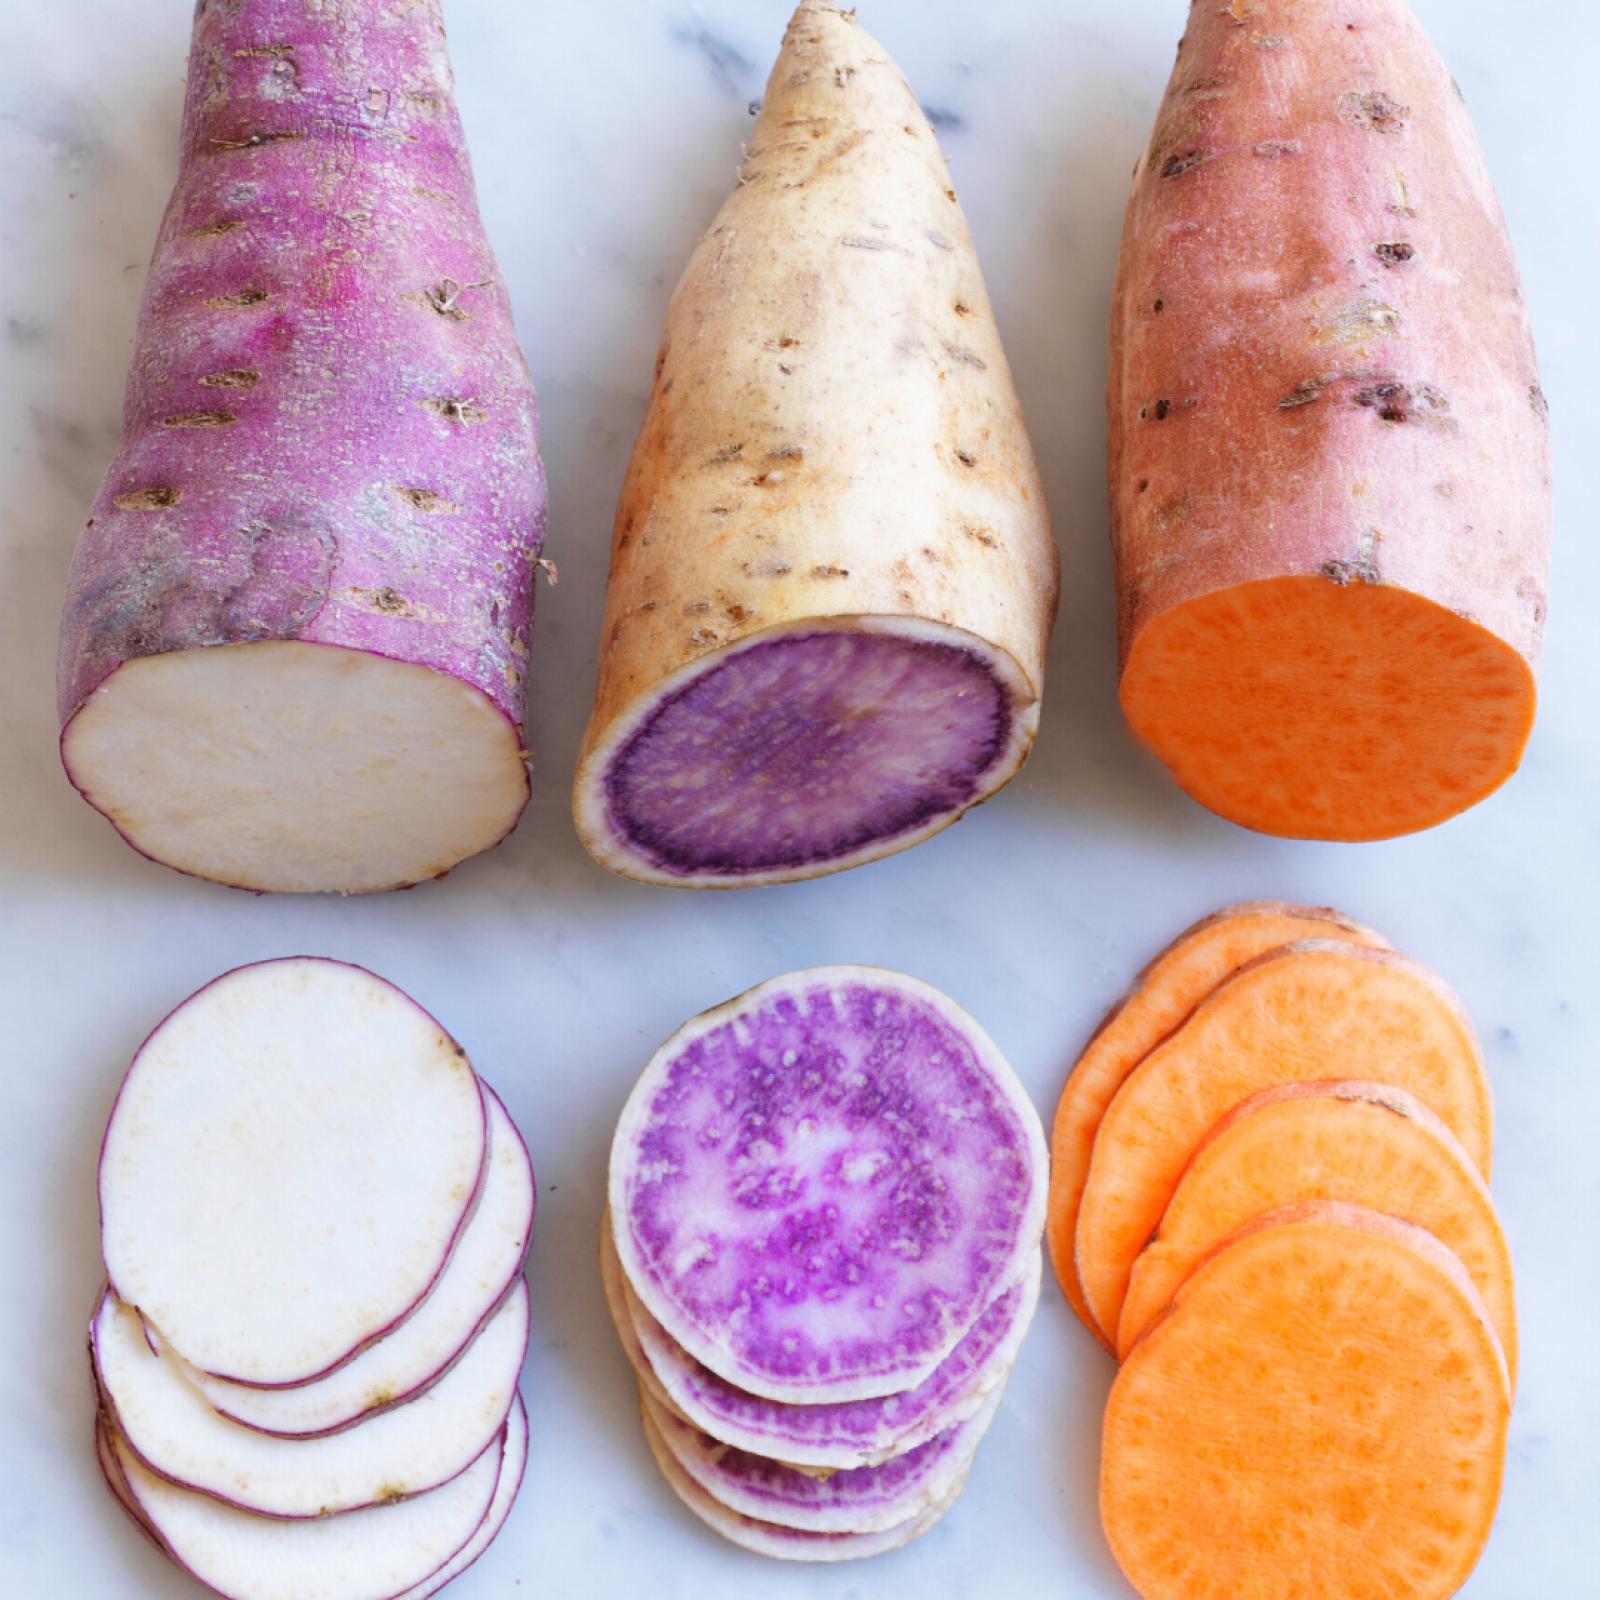 What You Should Know About The Purple Sweet Potato